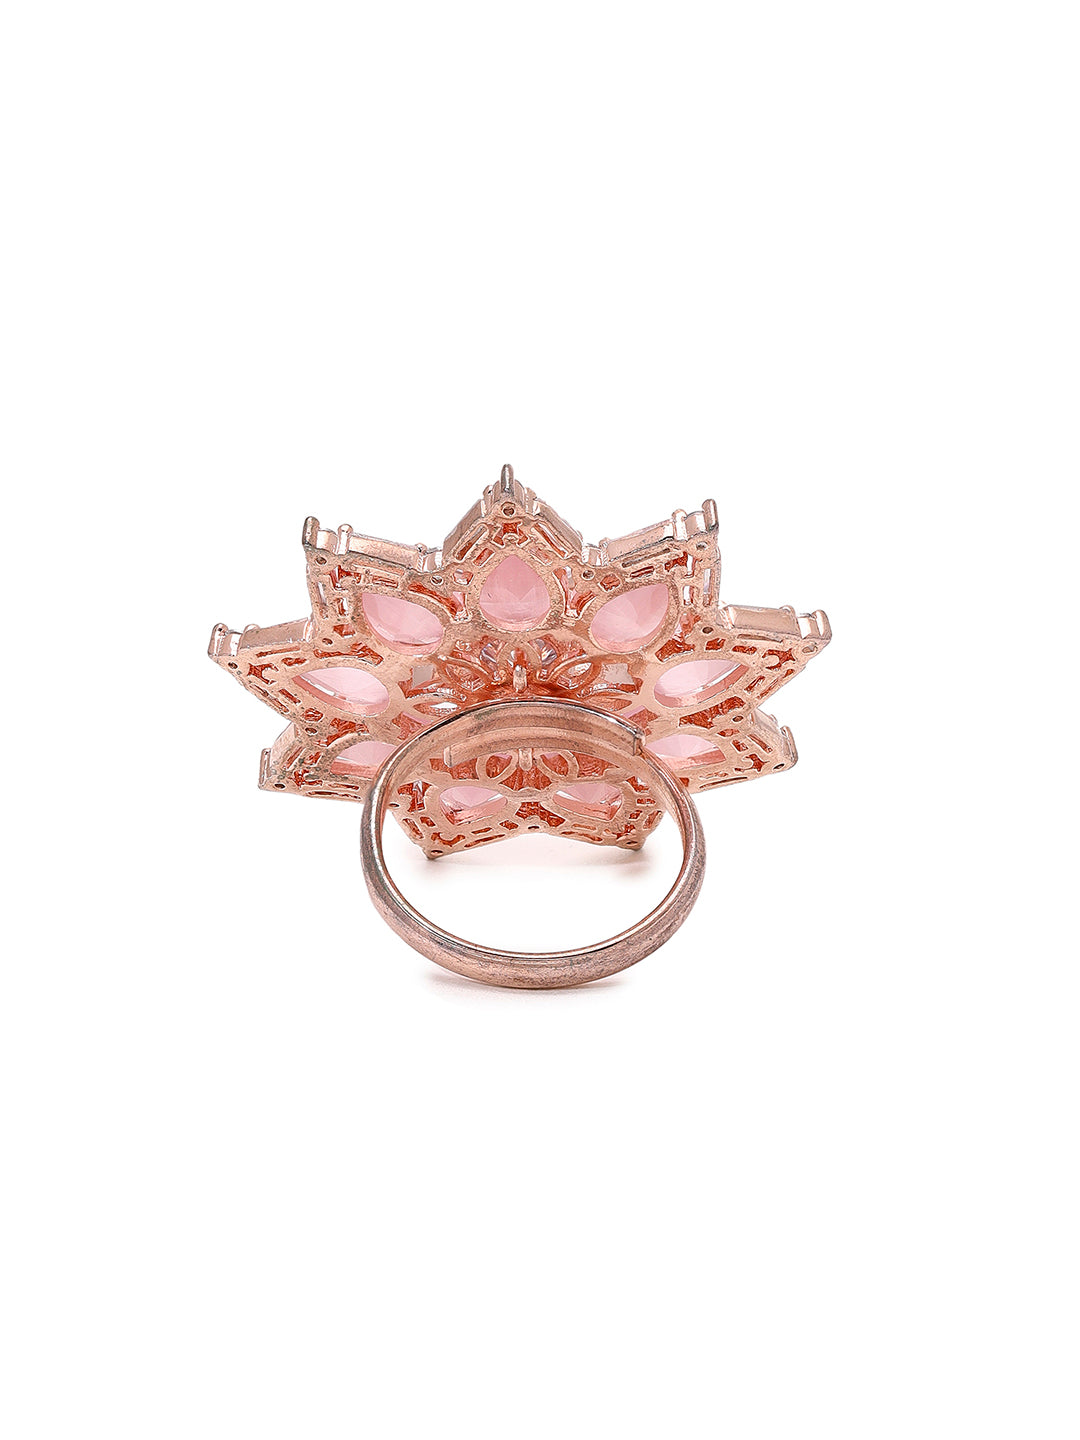 Priyaasi Rose Gold Plated Ring Adorned with Pink Stones